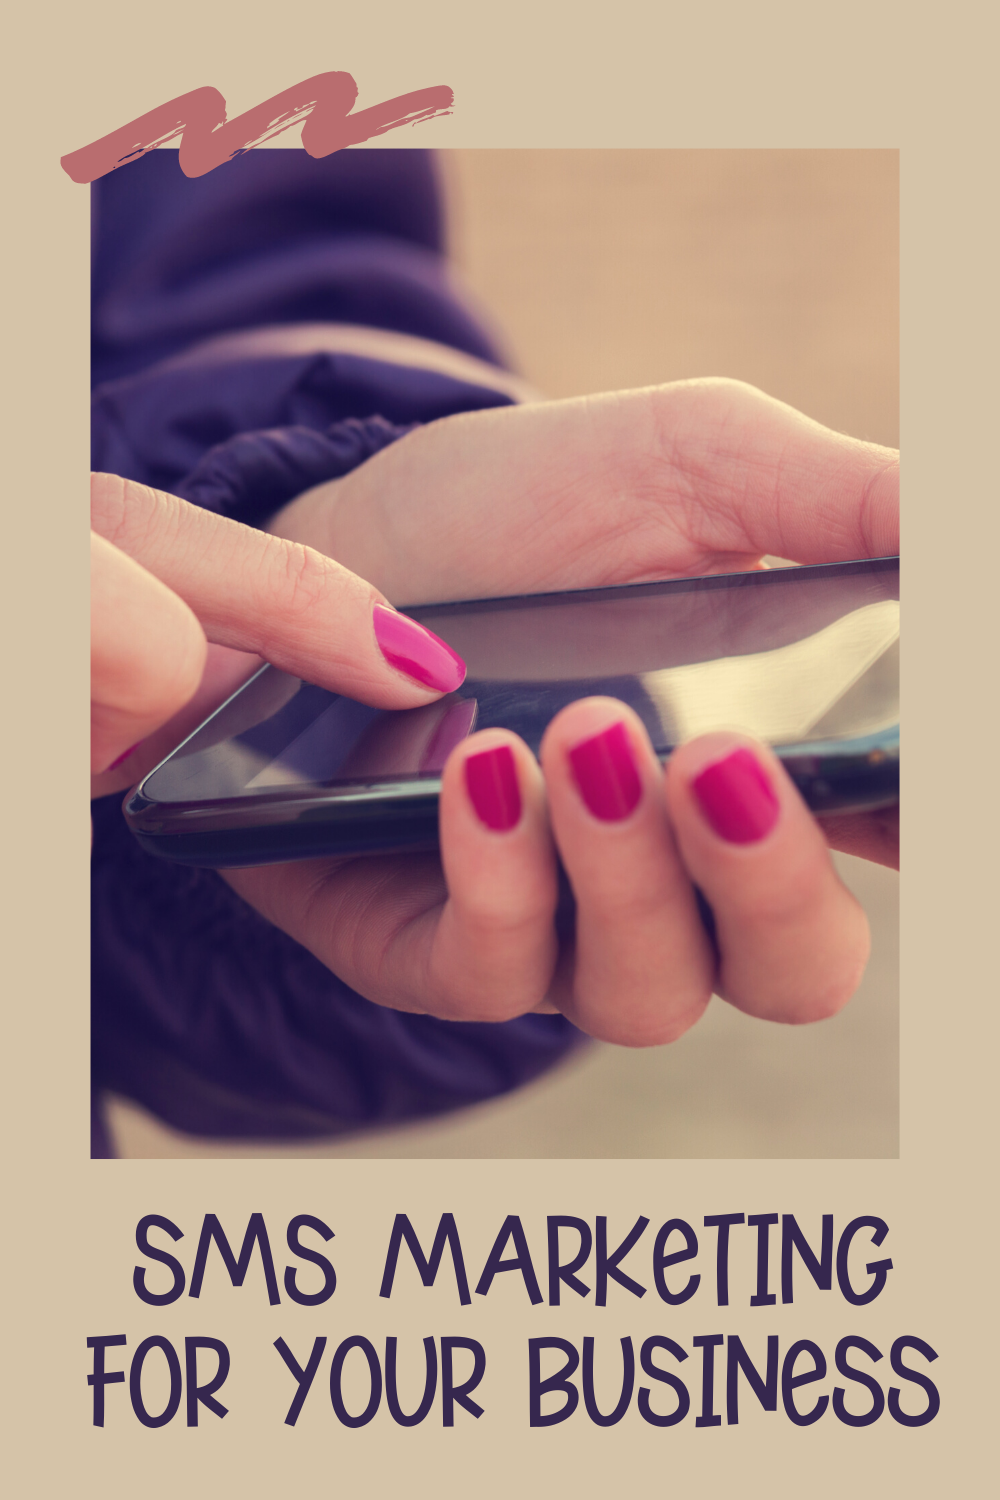 SMS Marketing for Your Business